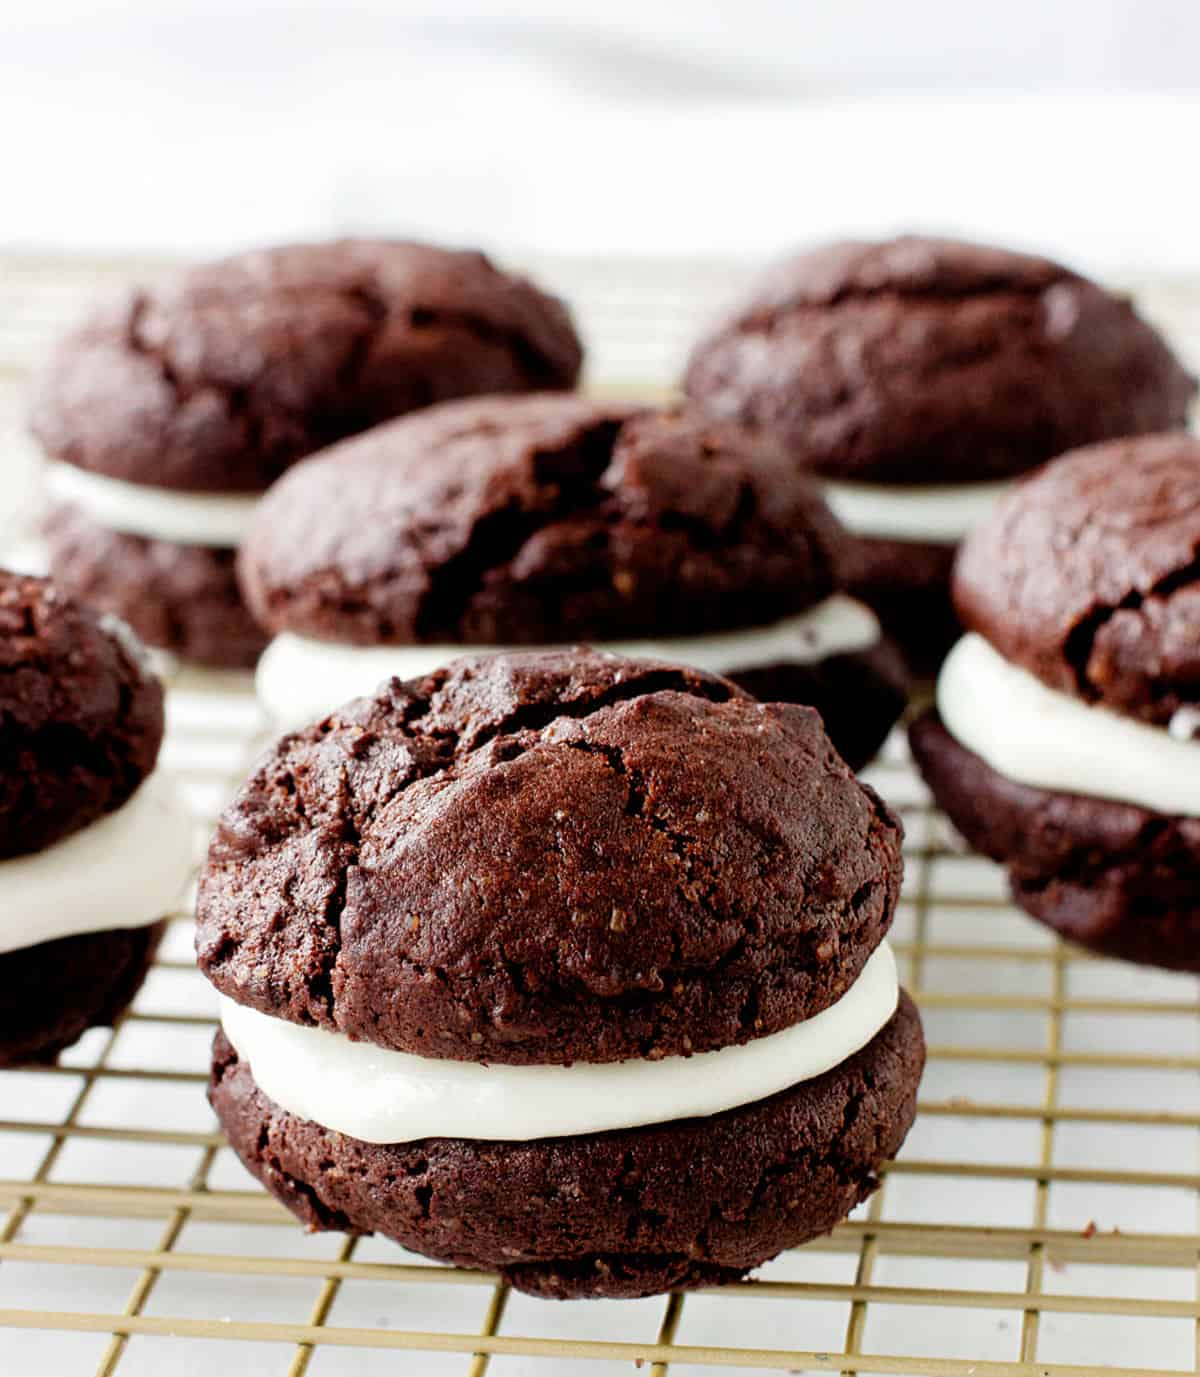 Several chocolate whoopie pies with creamy filling on a golden wire rack.